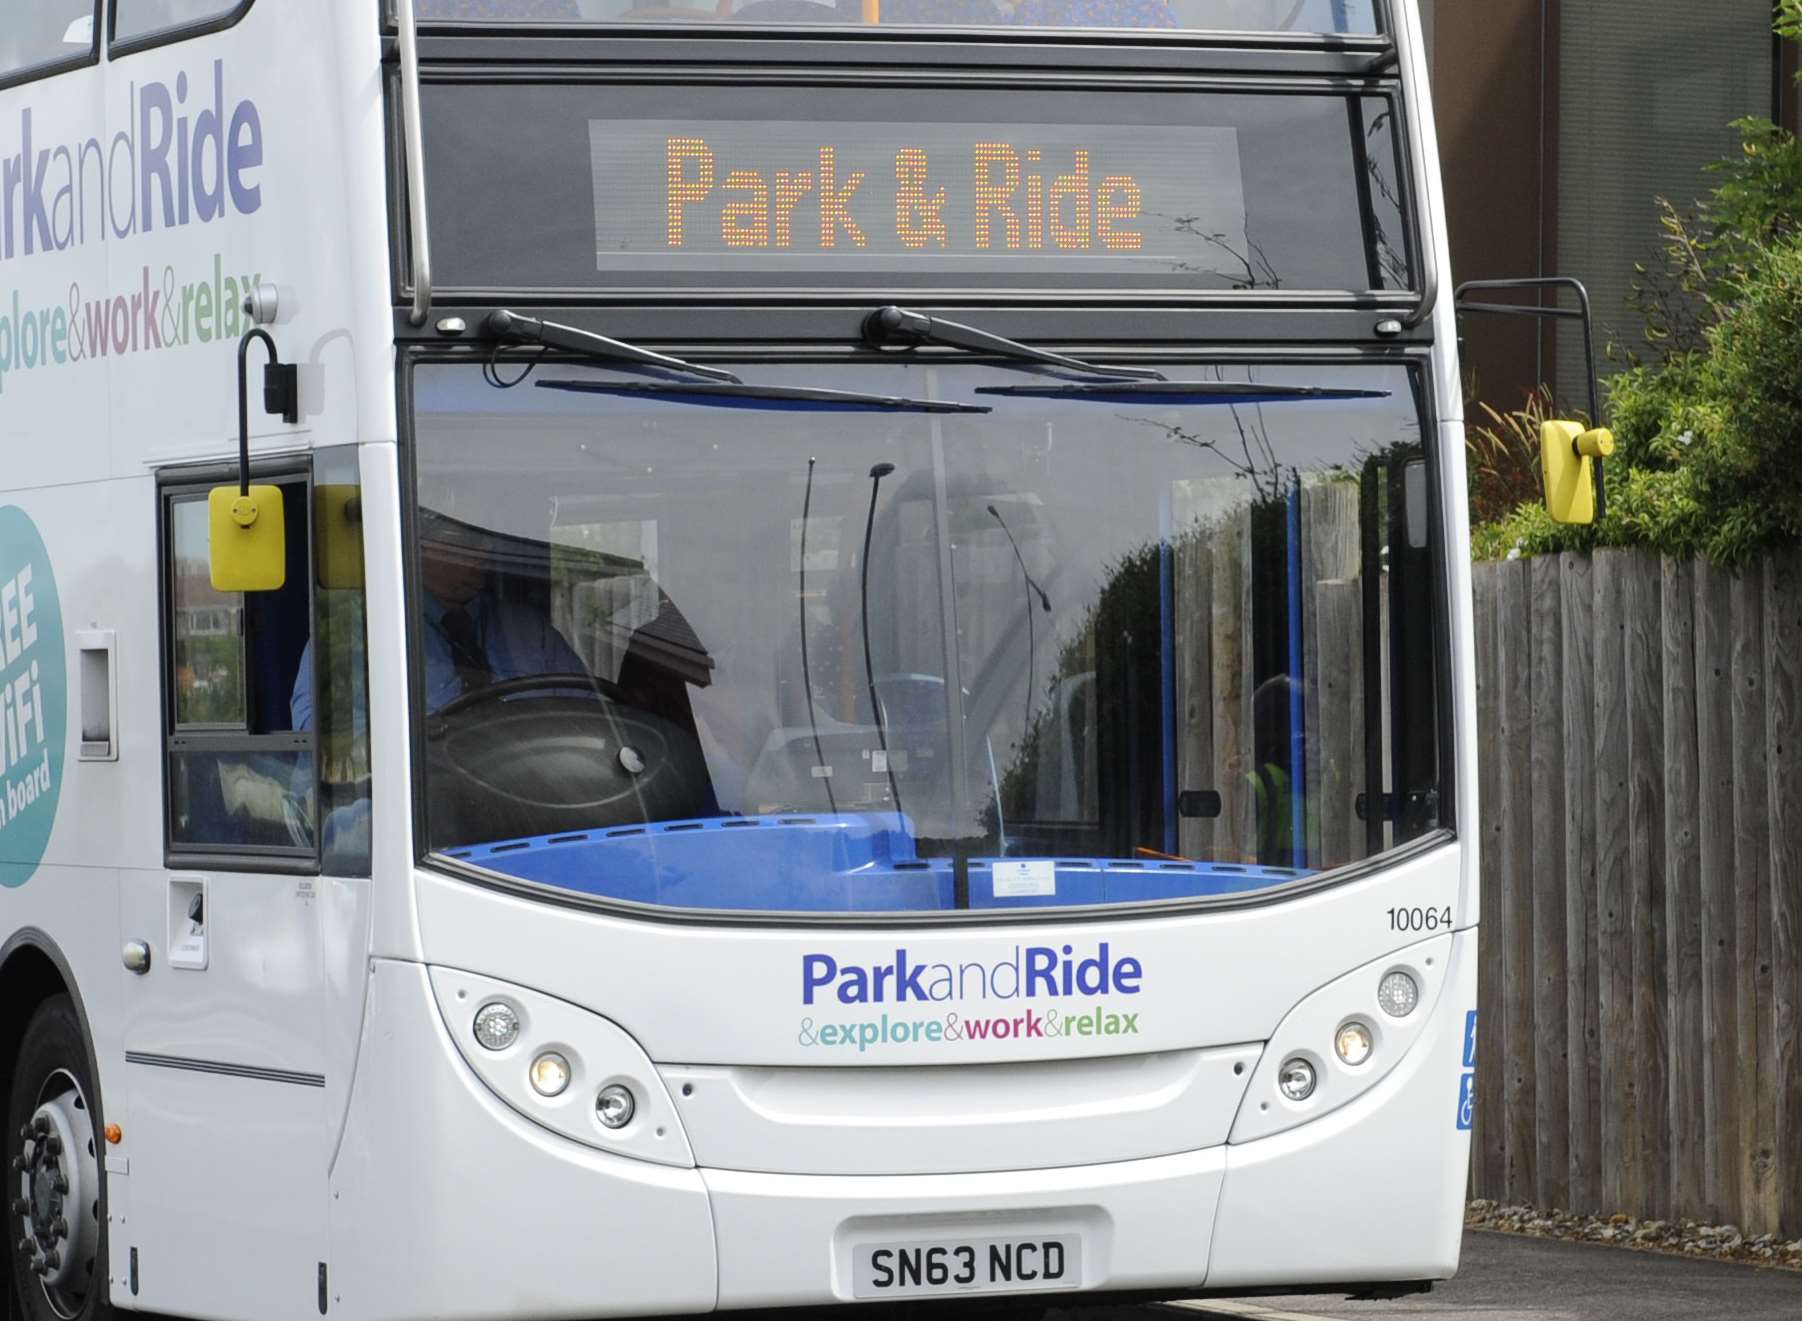 Park and ride is used in Canterbury and Maidstone